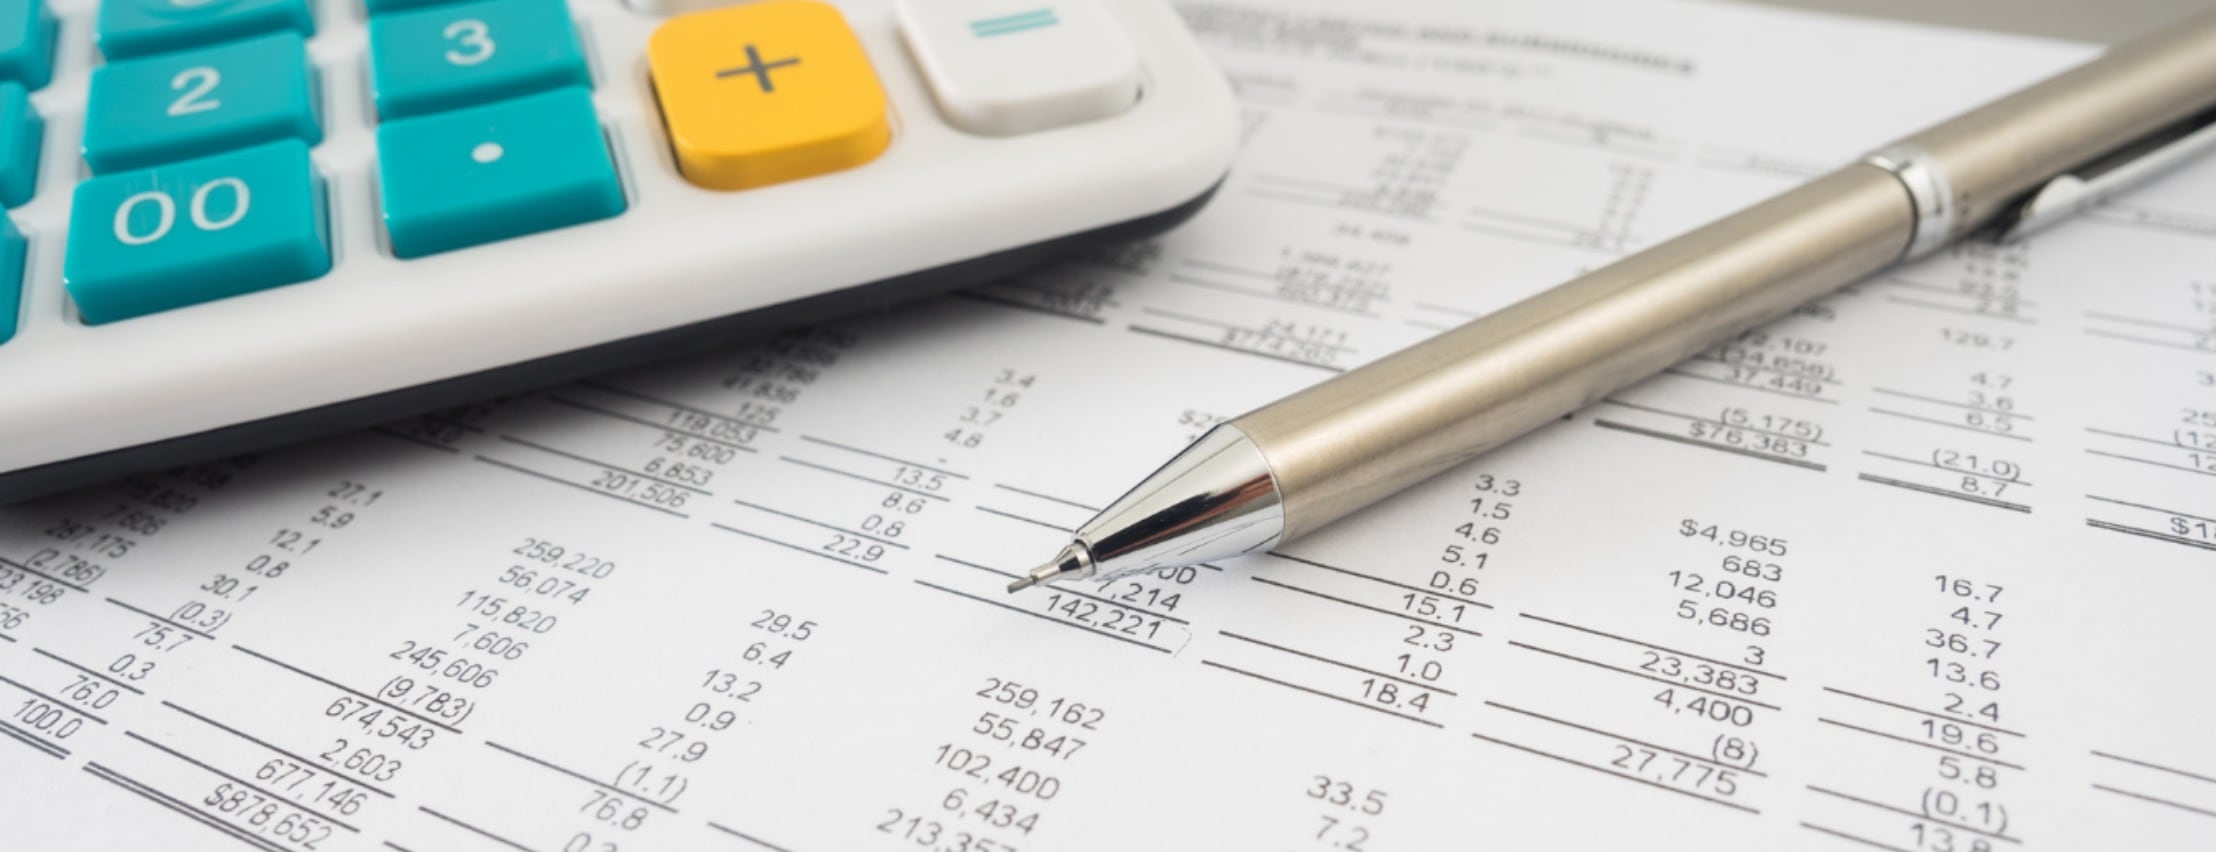 A calculator and mechanical pencil appear next to a small business balance sheet